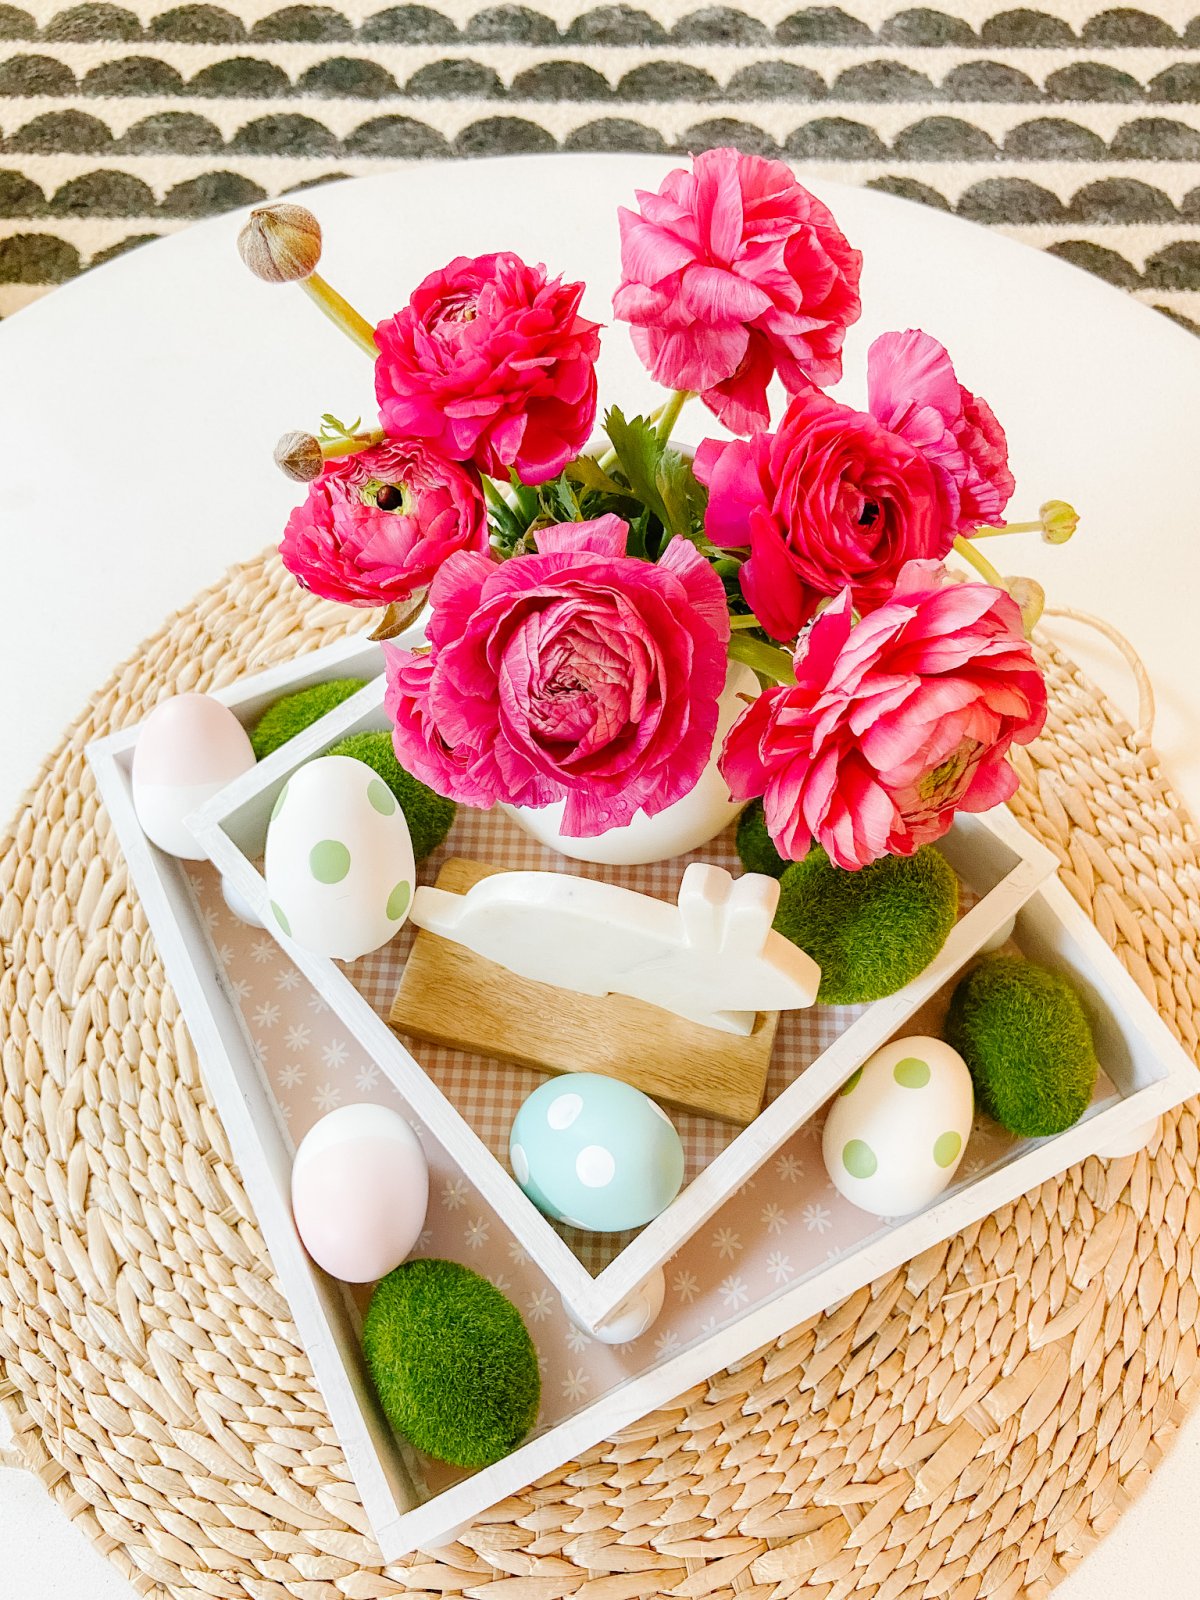 DIY Spring Footed Stacking Tray Centerpiece. Add ball feet to simple wood boxes, add scrapbook paper and layer with fresh flowers and spring items for a pretty centerpiece! 